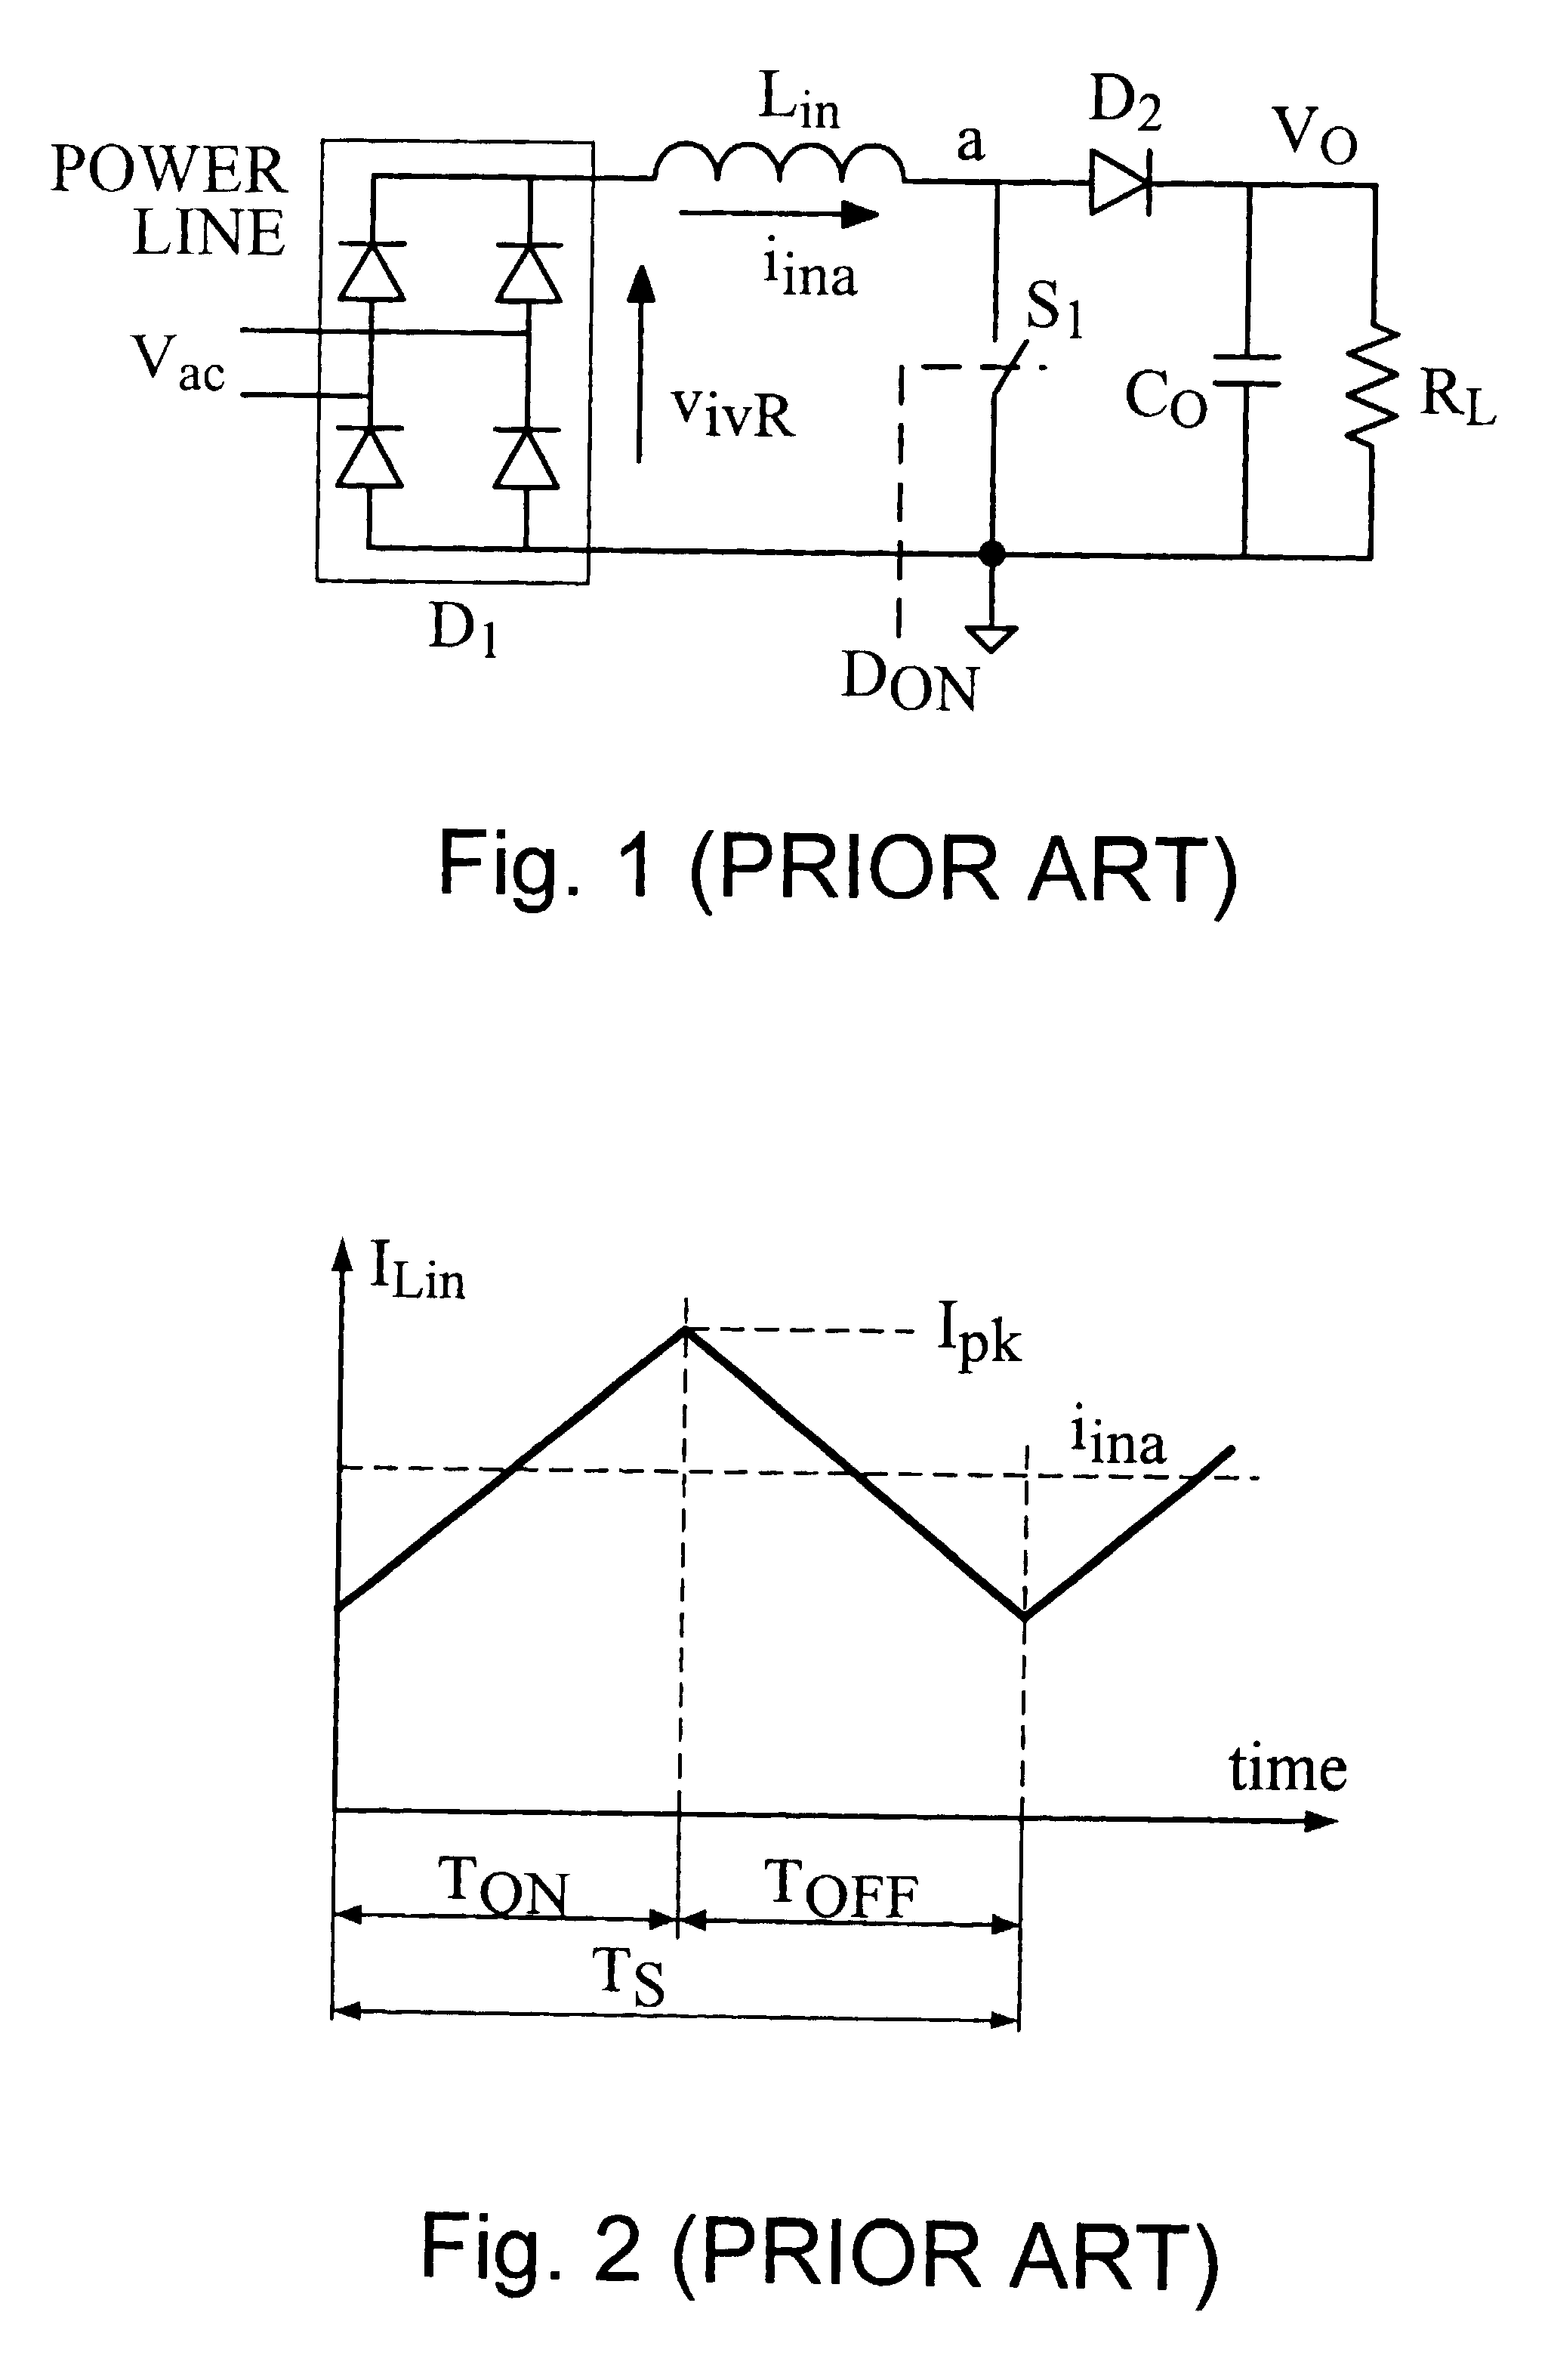 PFC apparatus for a converter operating in the borderline conduction mode